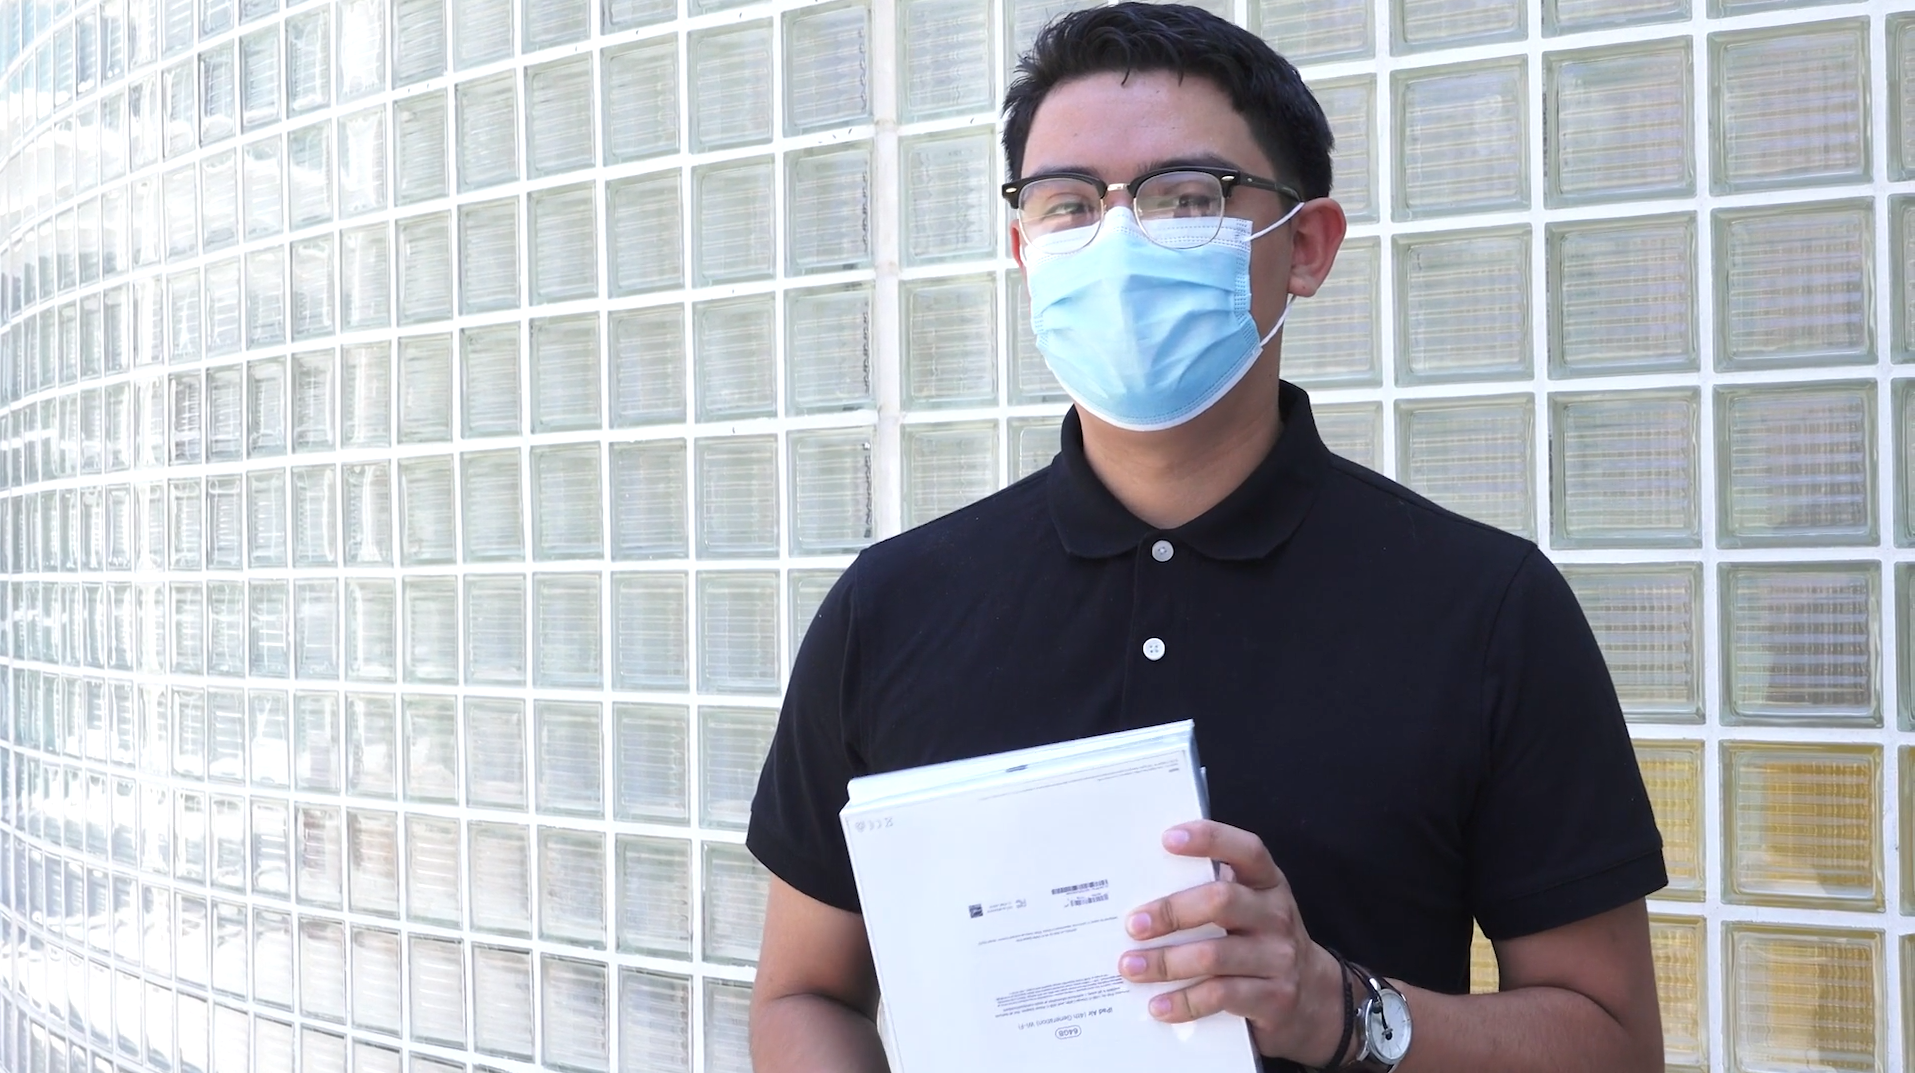 young man in polo shirt and protective face mask stands holding white boxes.